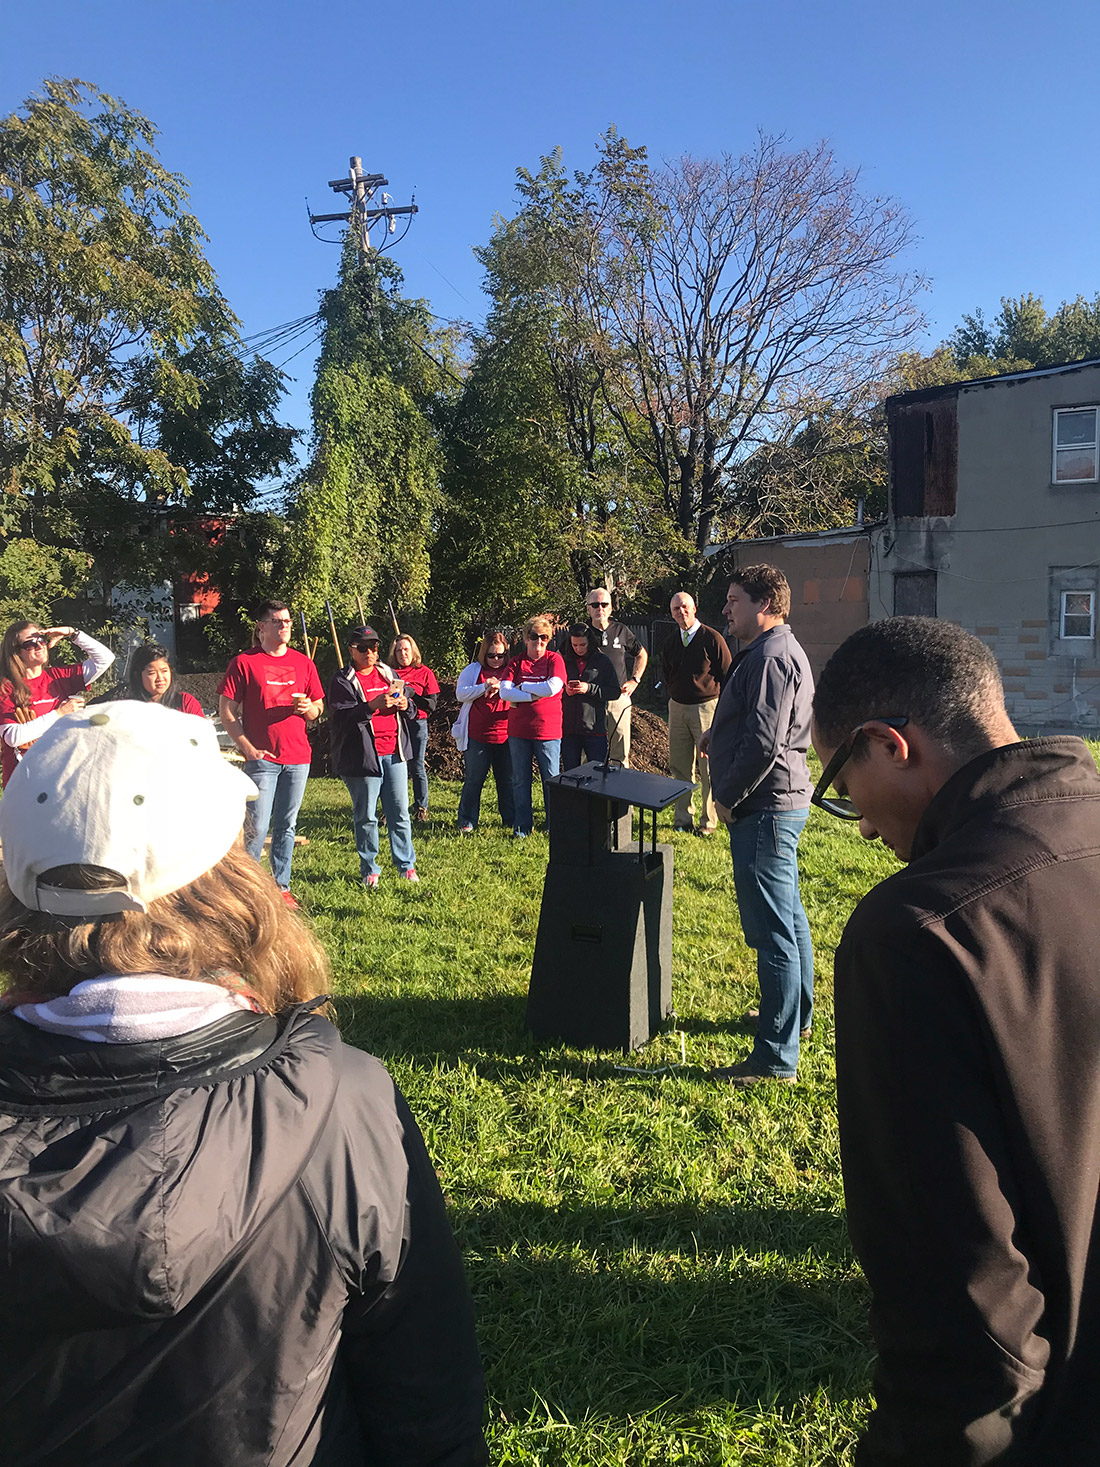 Ian Leahy, American Forests’ director of urban forests programs, shares with Bank of America volunteers about the effects this project will have on the neighborhood.